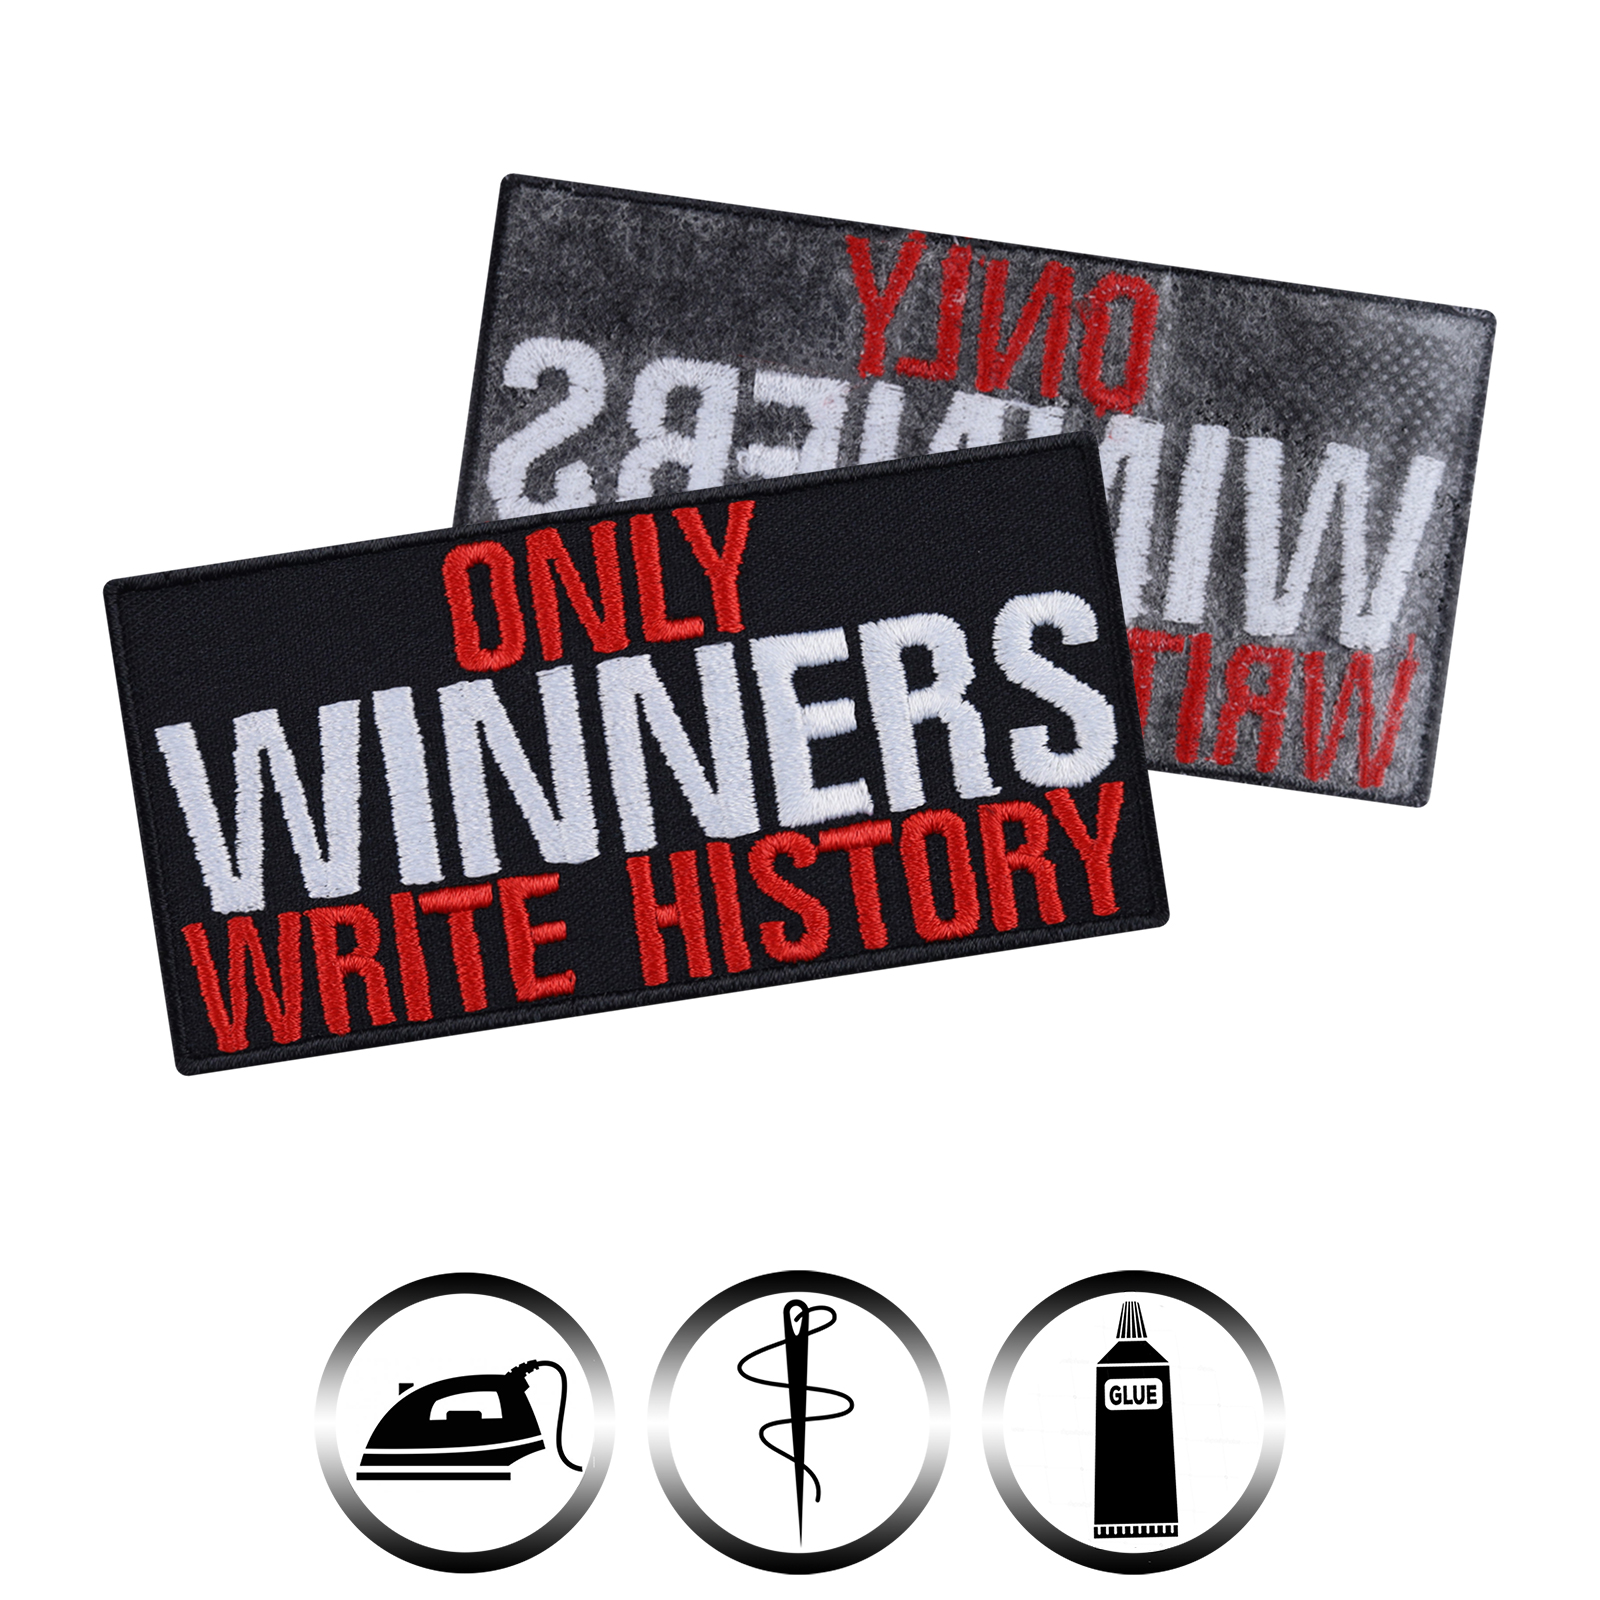 Only winners write history - Patch